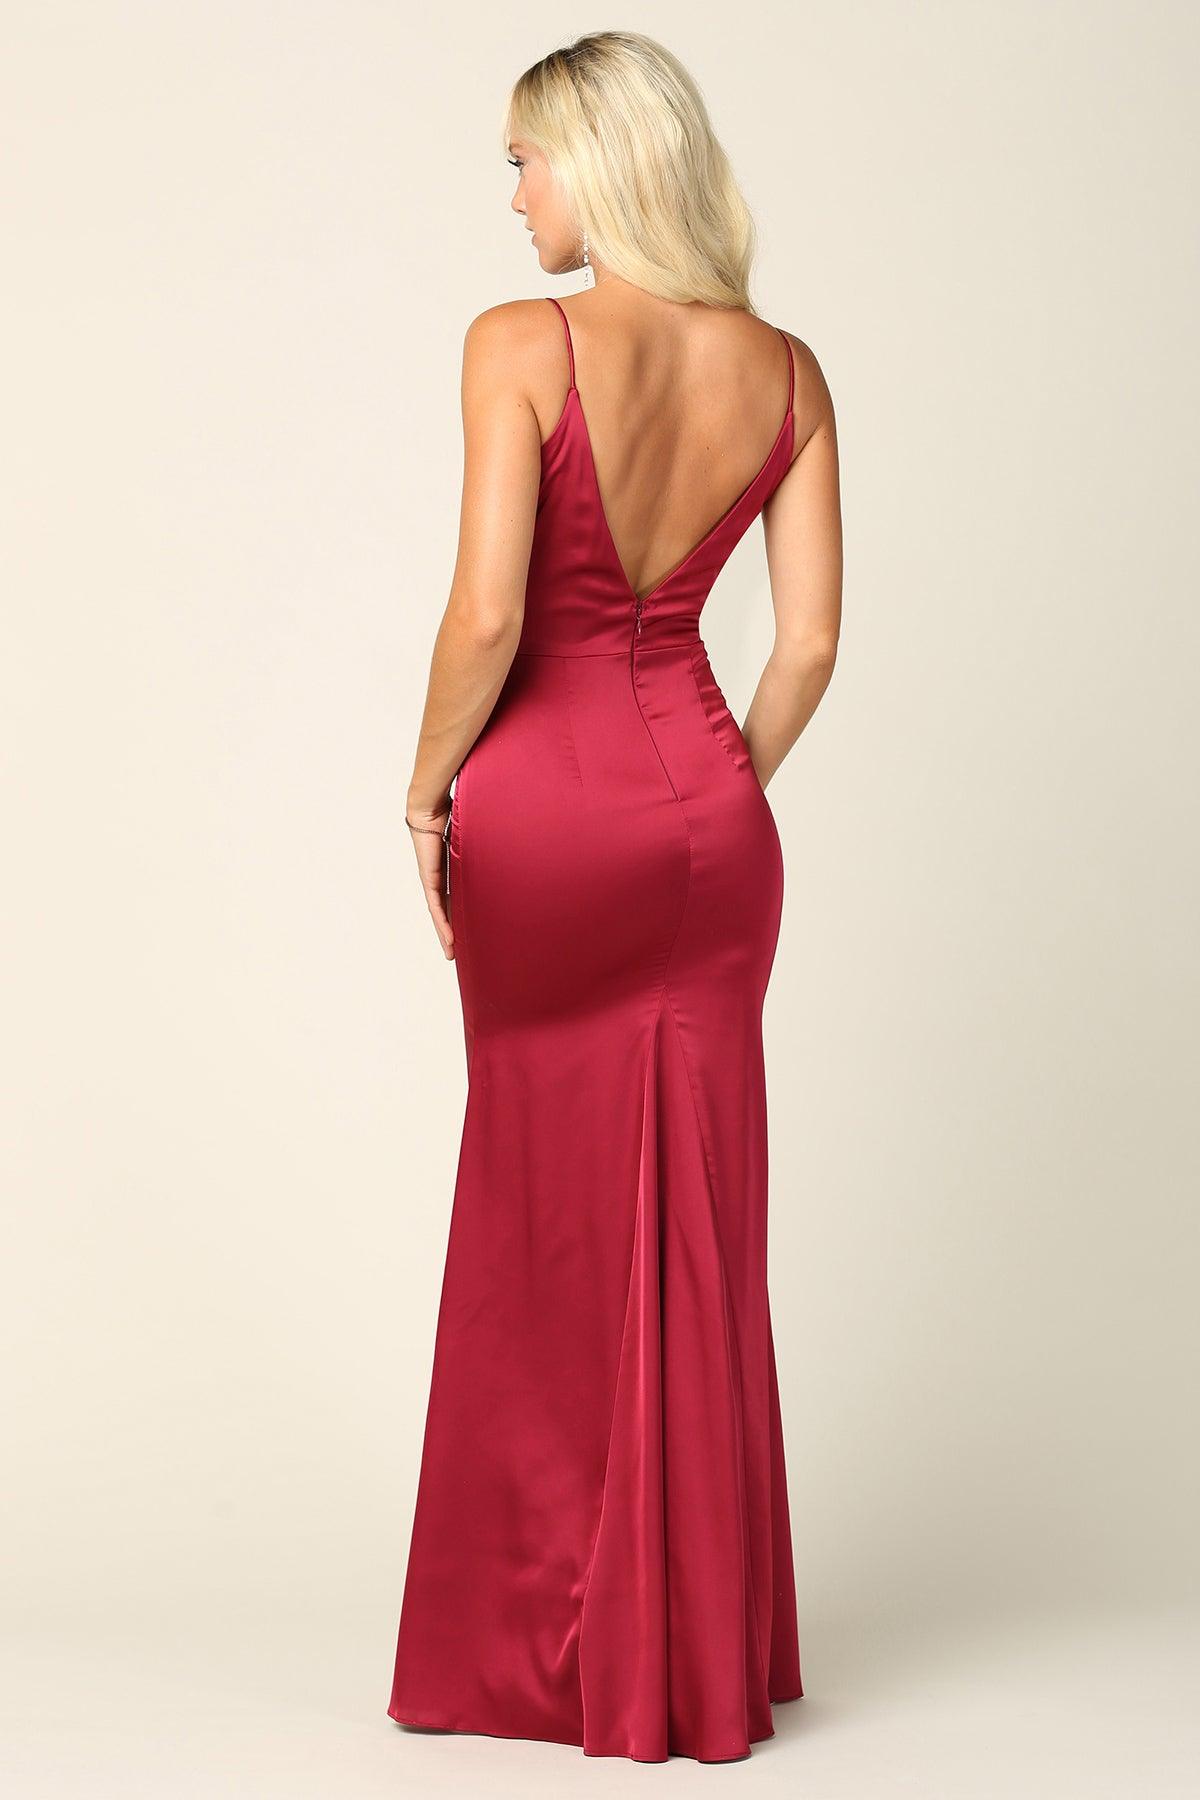 Long Spaghetti Strap Formal Satin Bridesmaids Dress For 122 99 The Dress Outlet